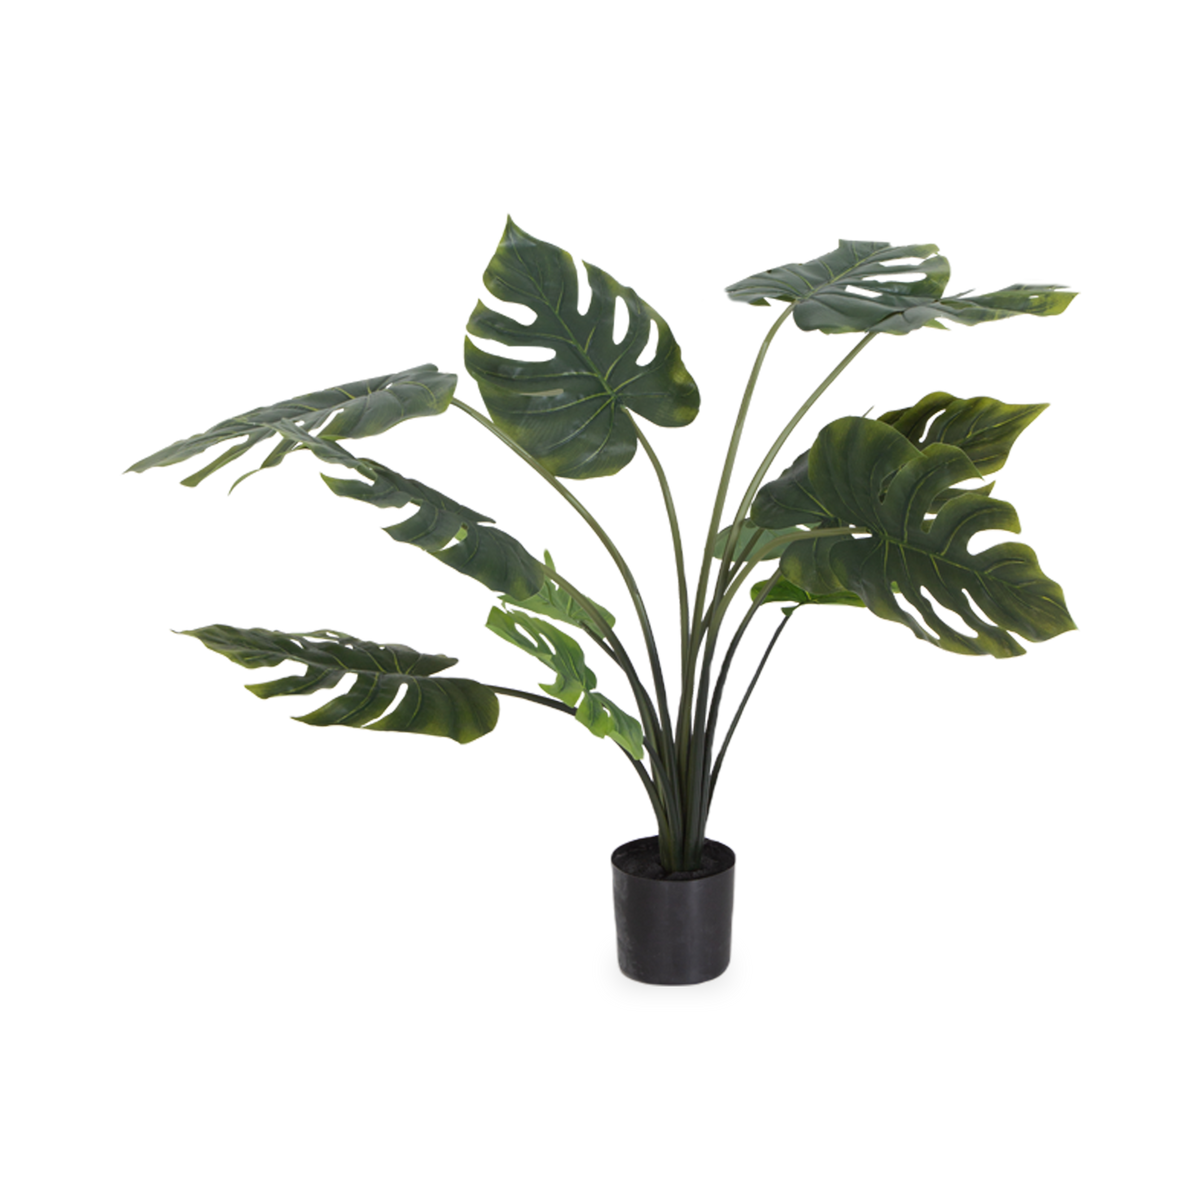 This Monstera Plant adds elegance and greenery to any room.